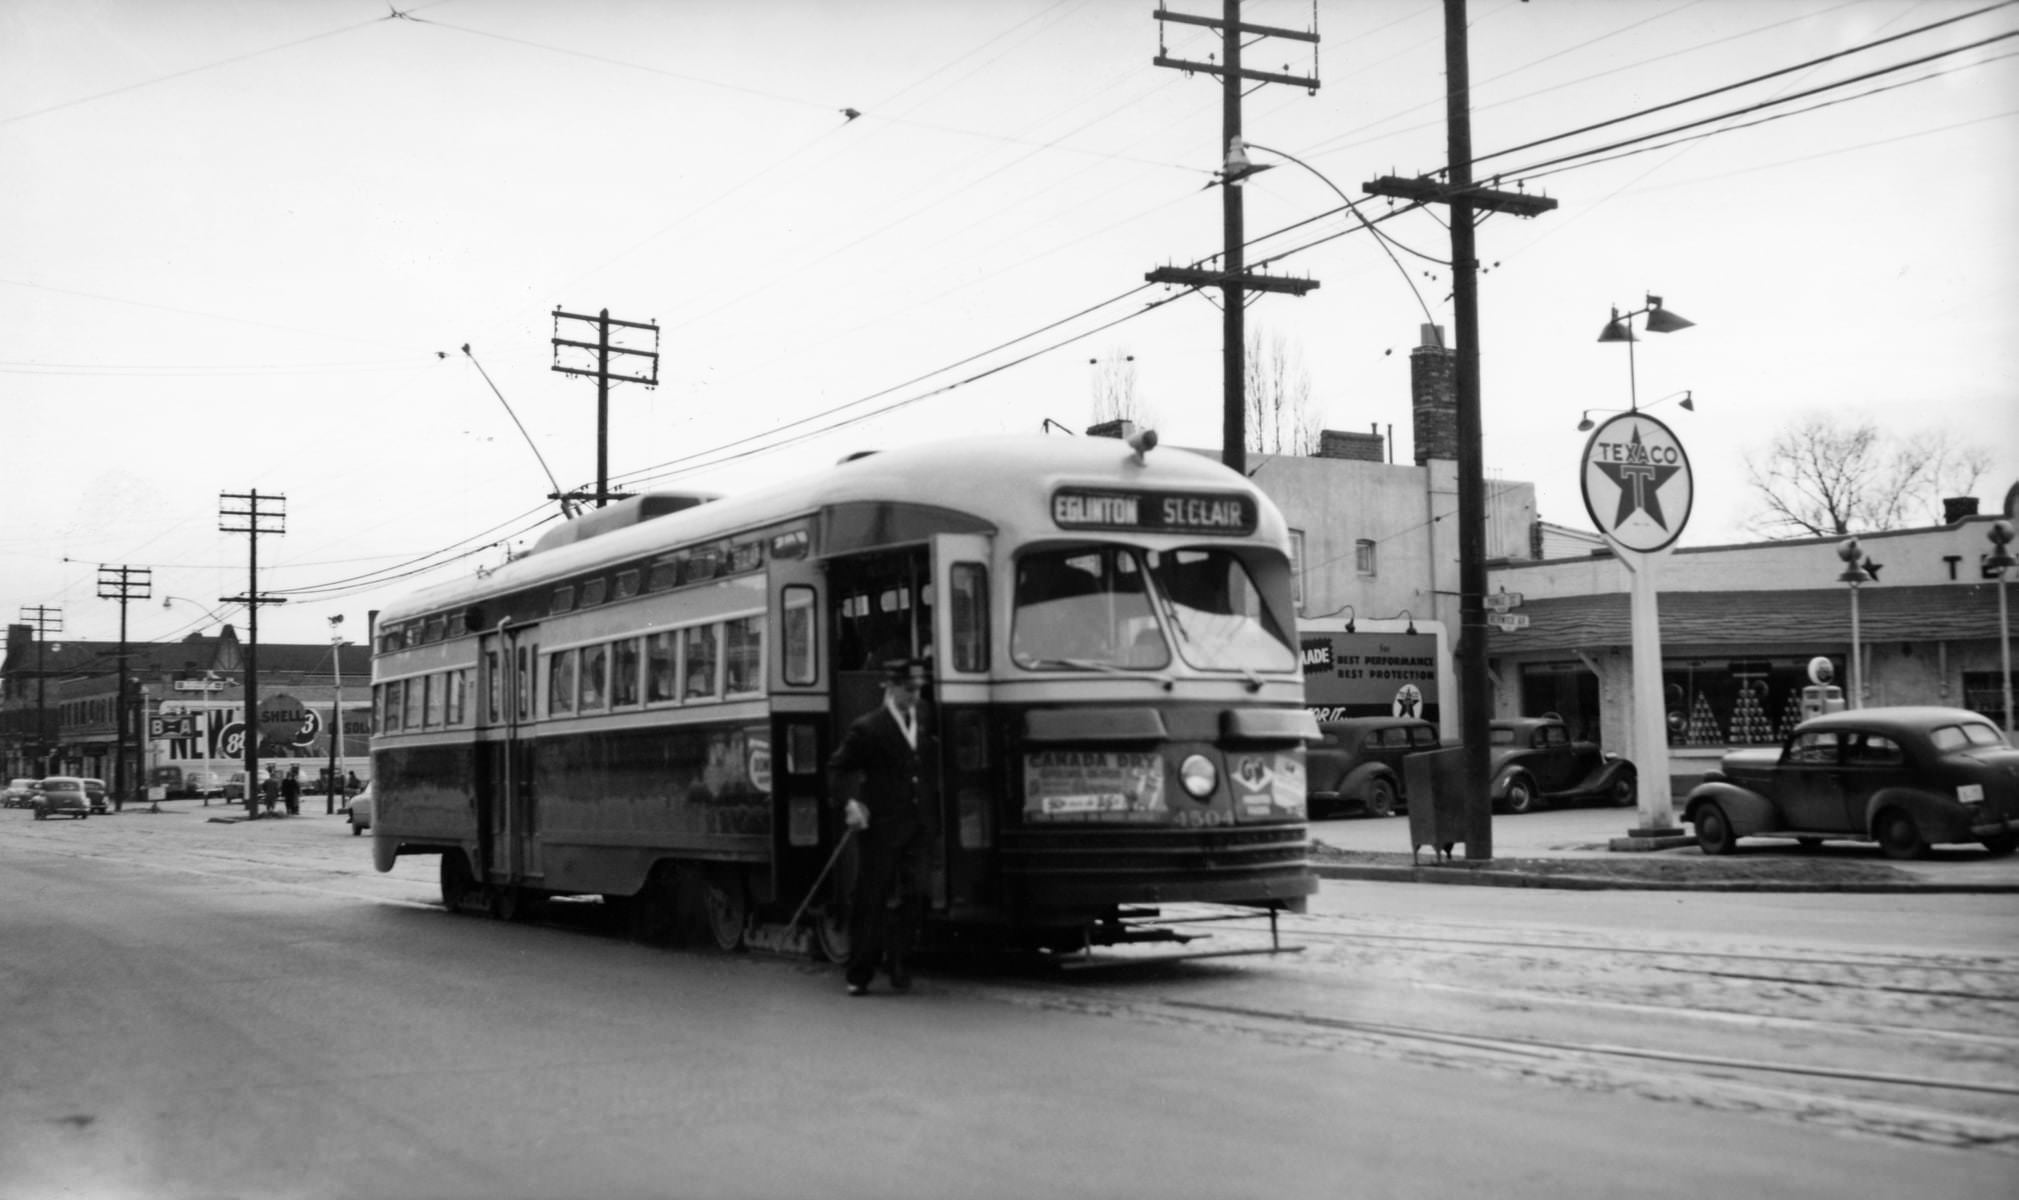 ST Clair streetcar NB on Yonge st at Berwick ave on a Diversion run, 1952